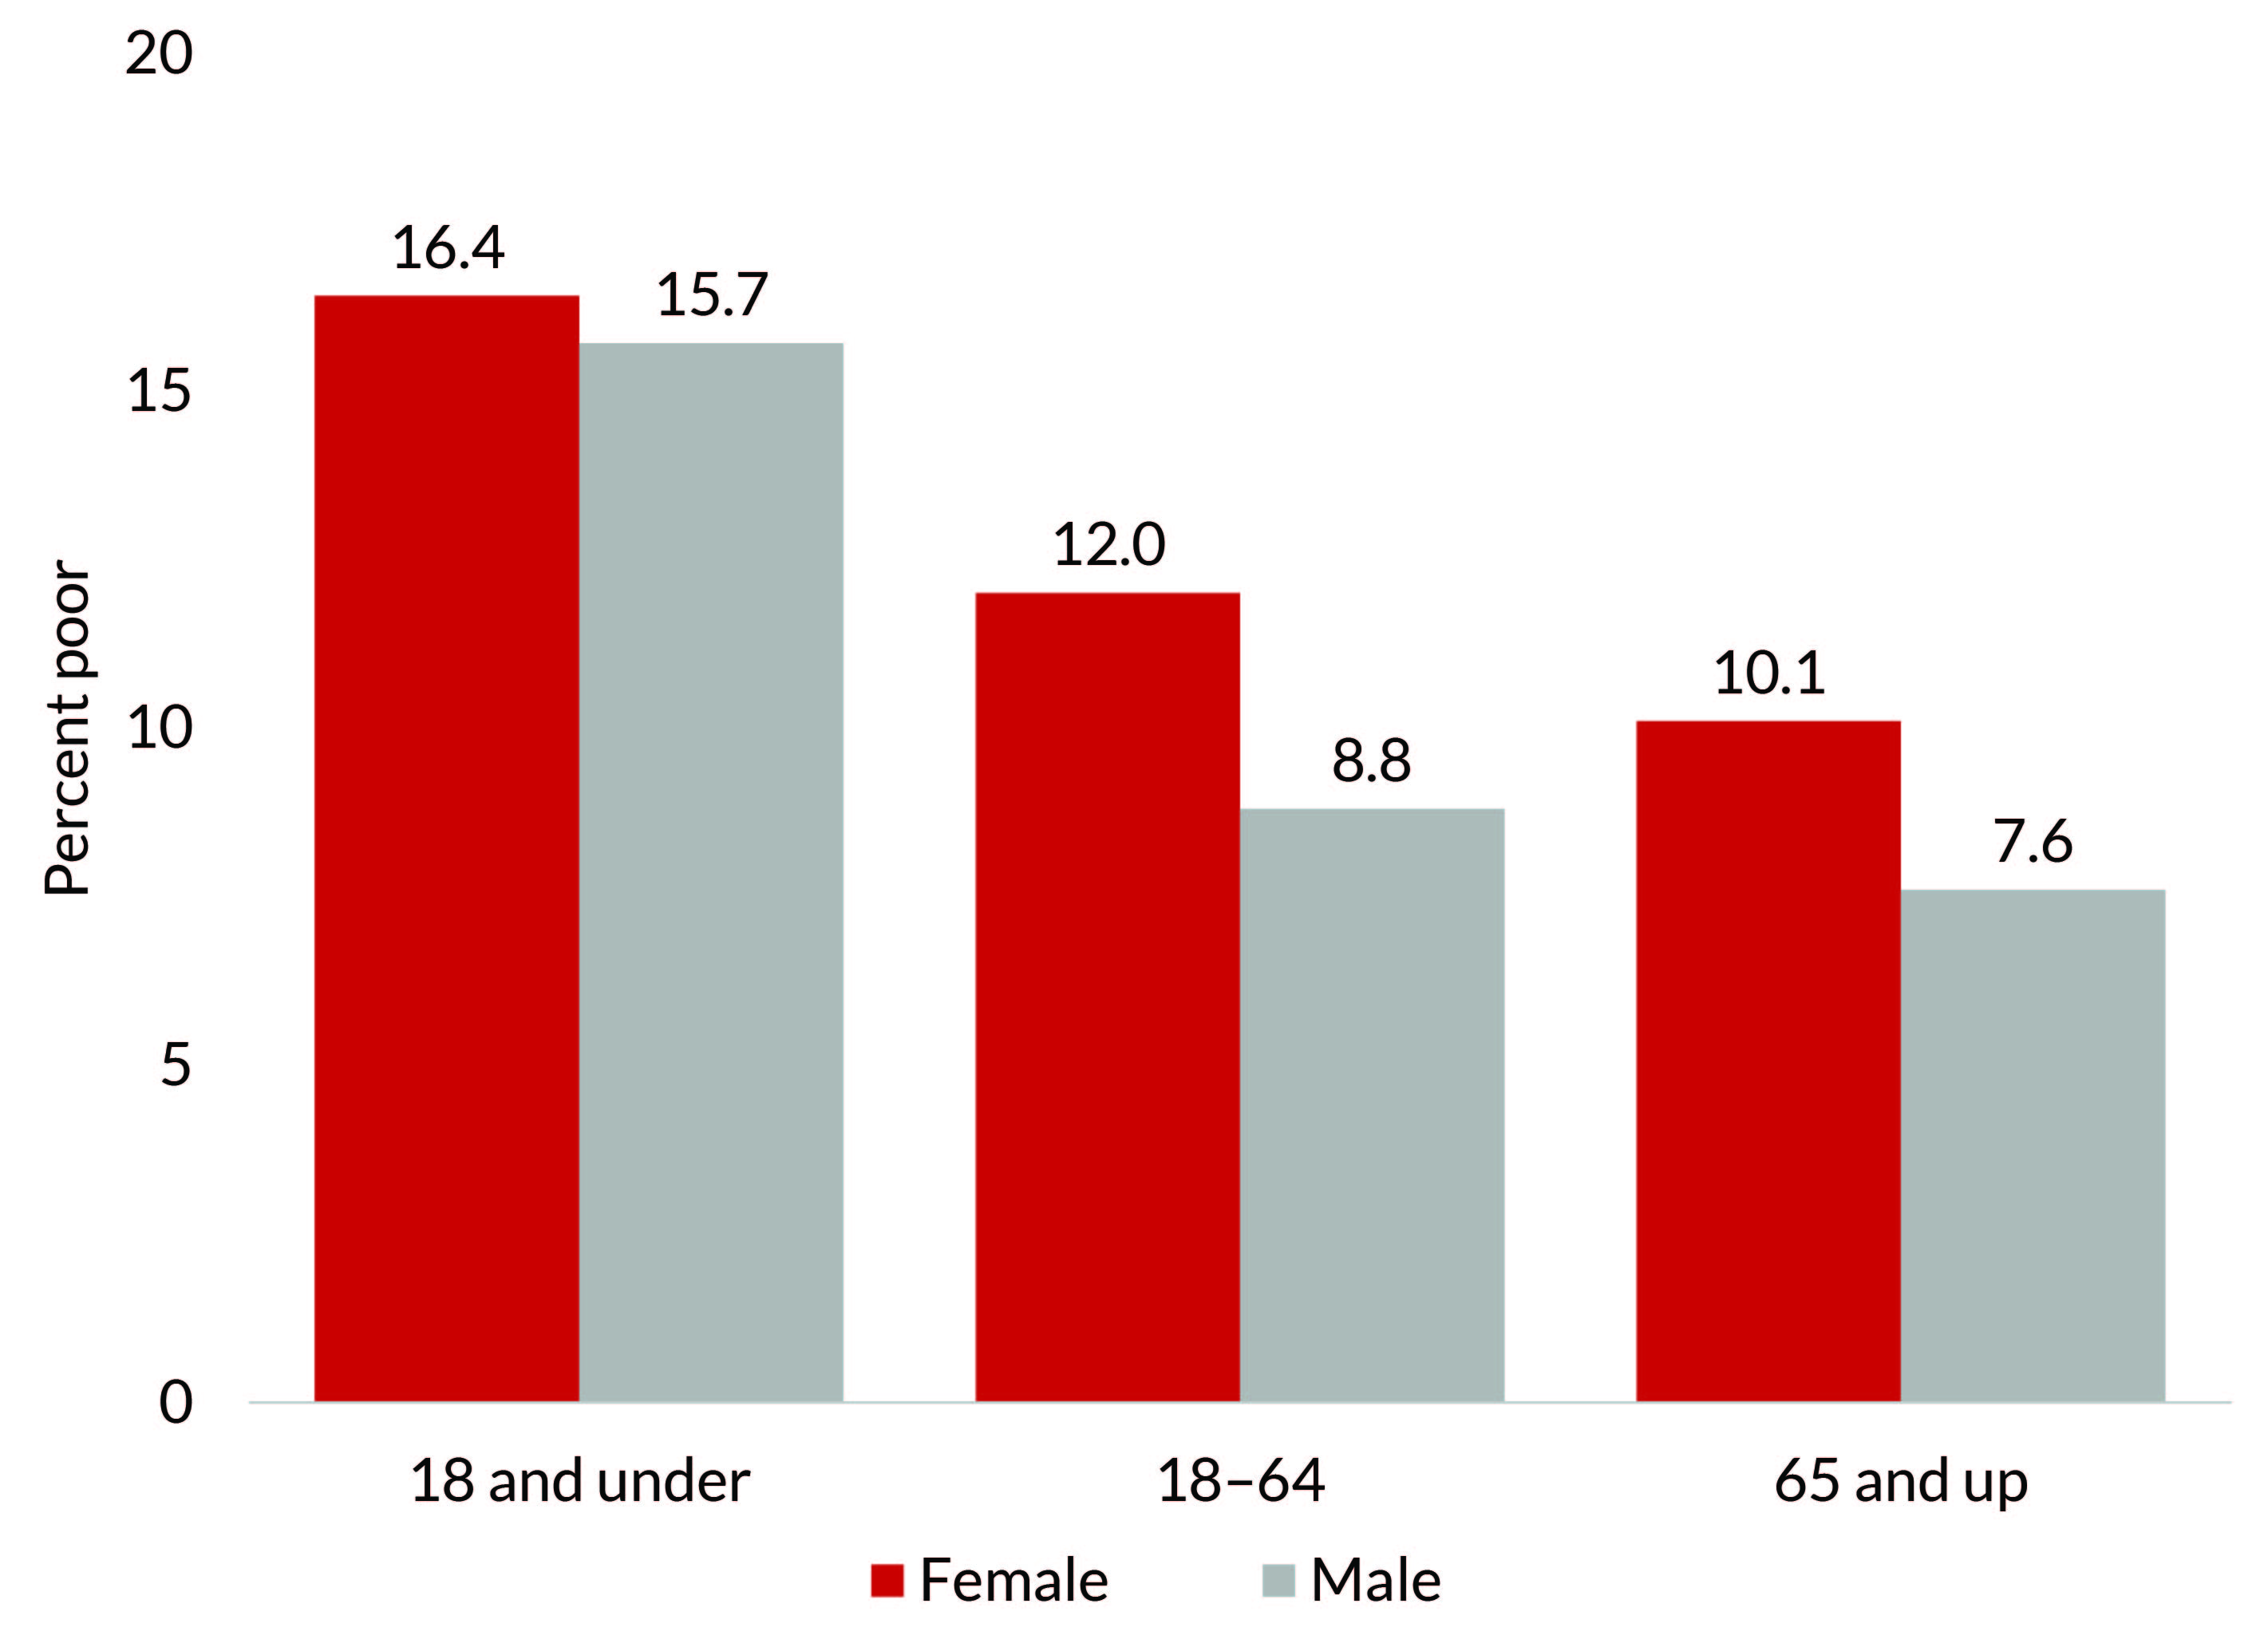 Bar chart comparing poverty rates between adult males and females in 2020: 18 and under Female 16.4%, Male 15.7%; 18-64 Female 12.0%, Male 8.8%; and 65 and up Female 10.1%, Male 7.6%